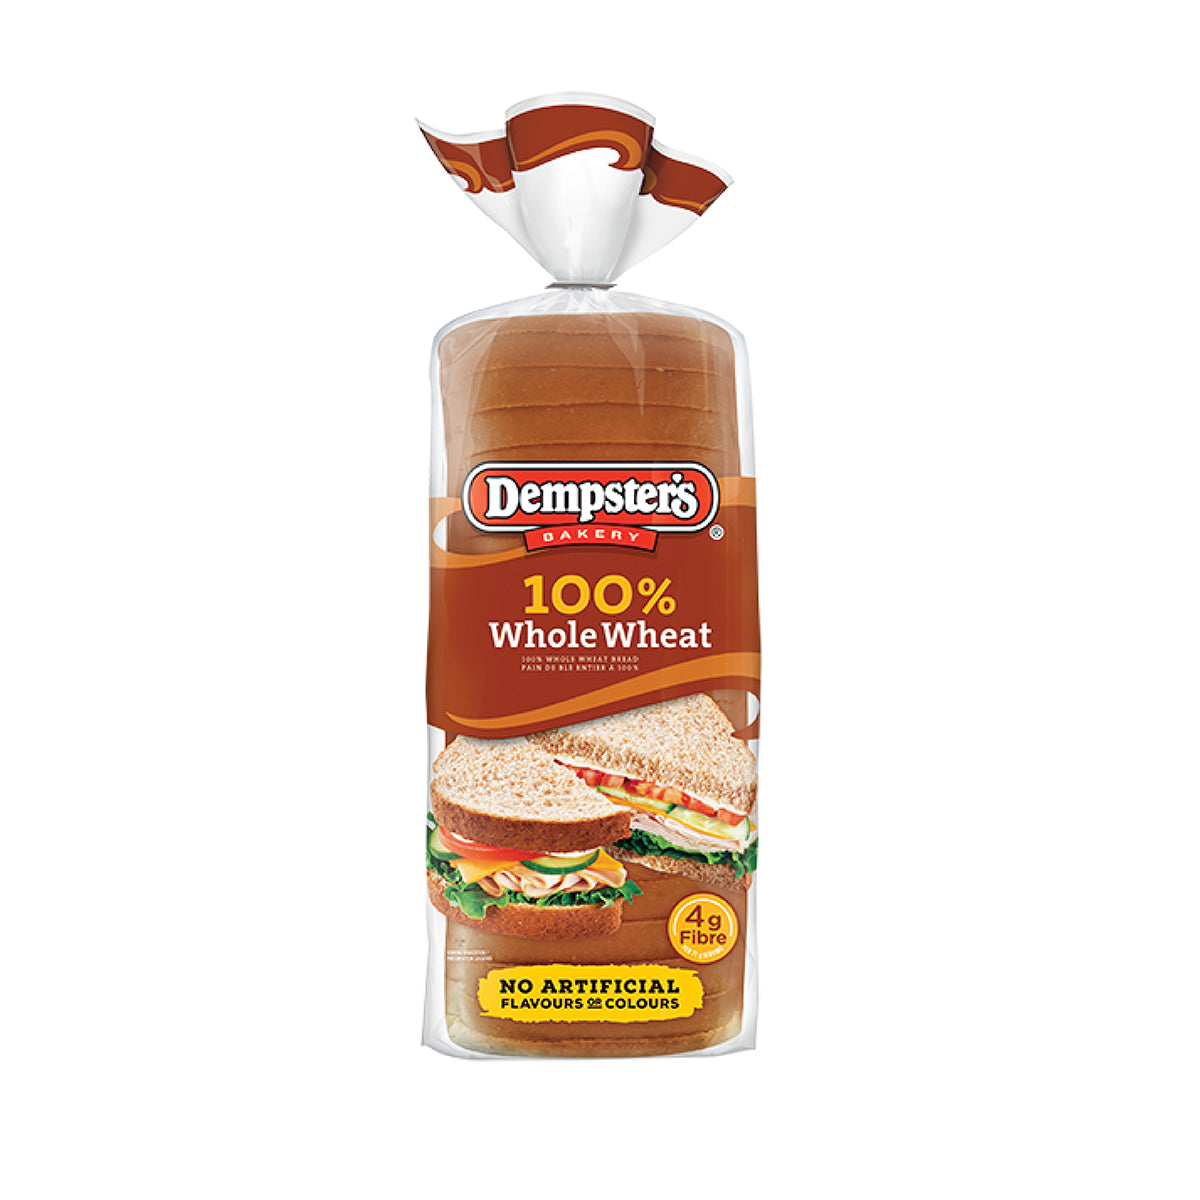 Dempster's Bread 100% Whole Wheat, 675 g